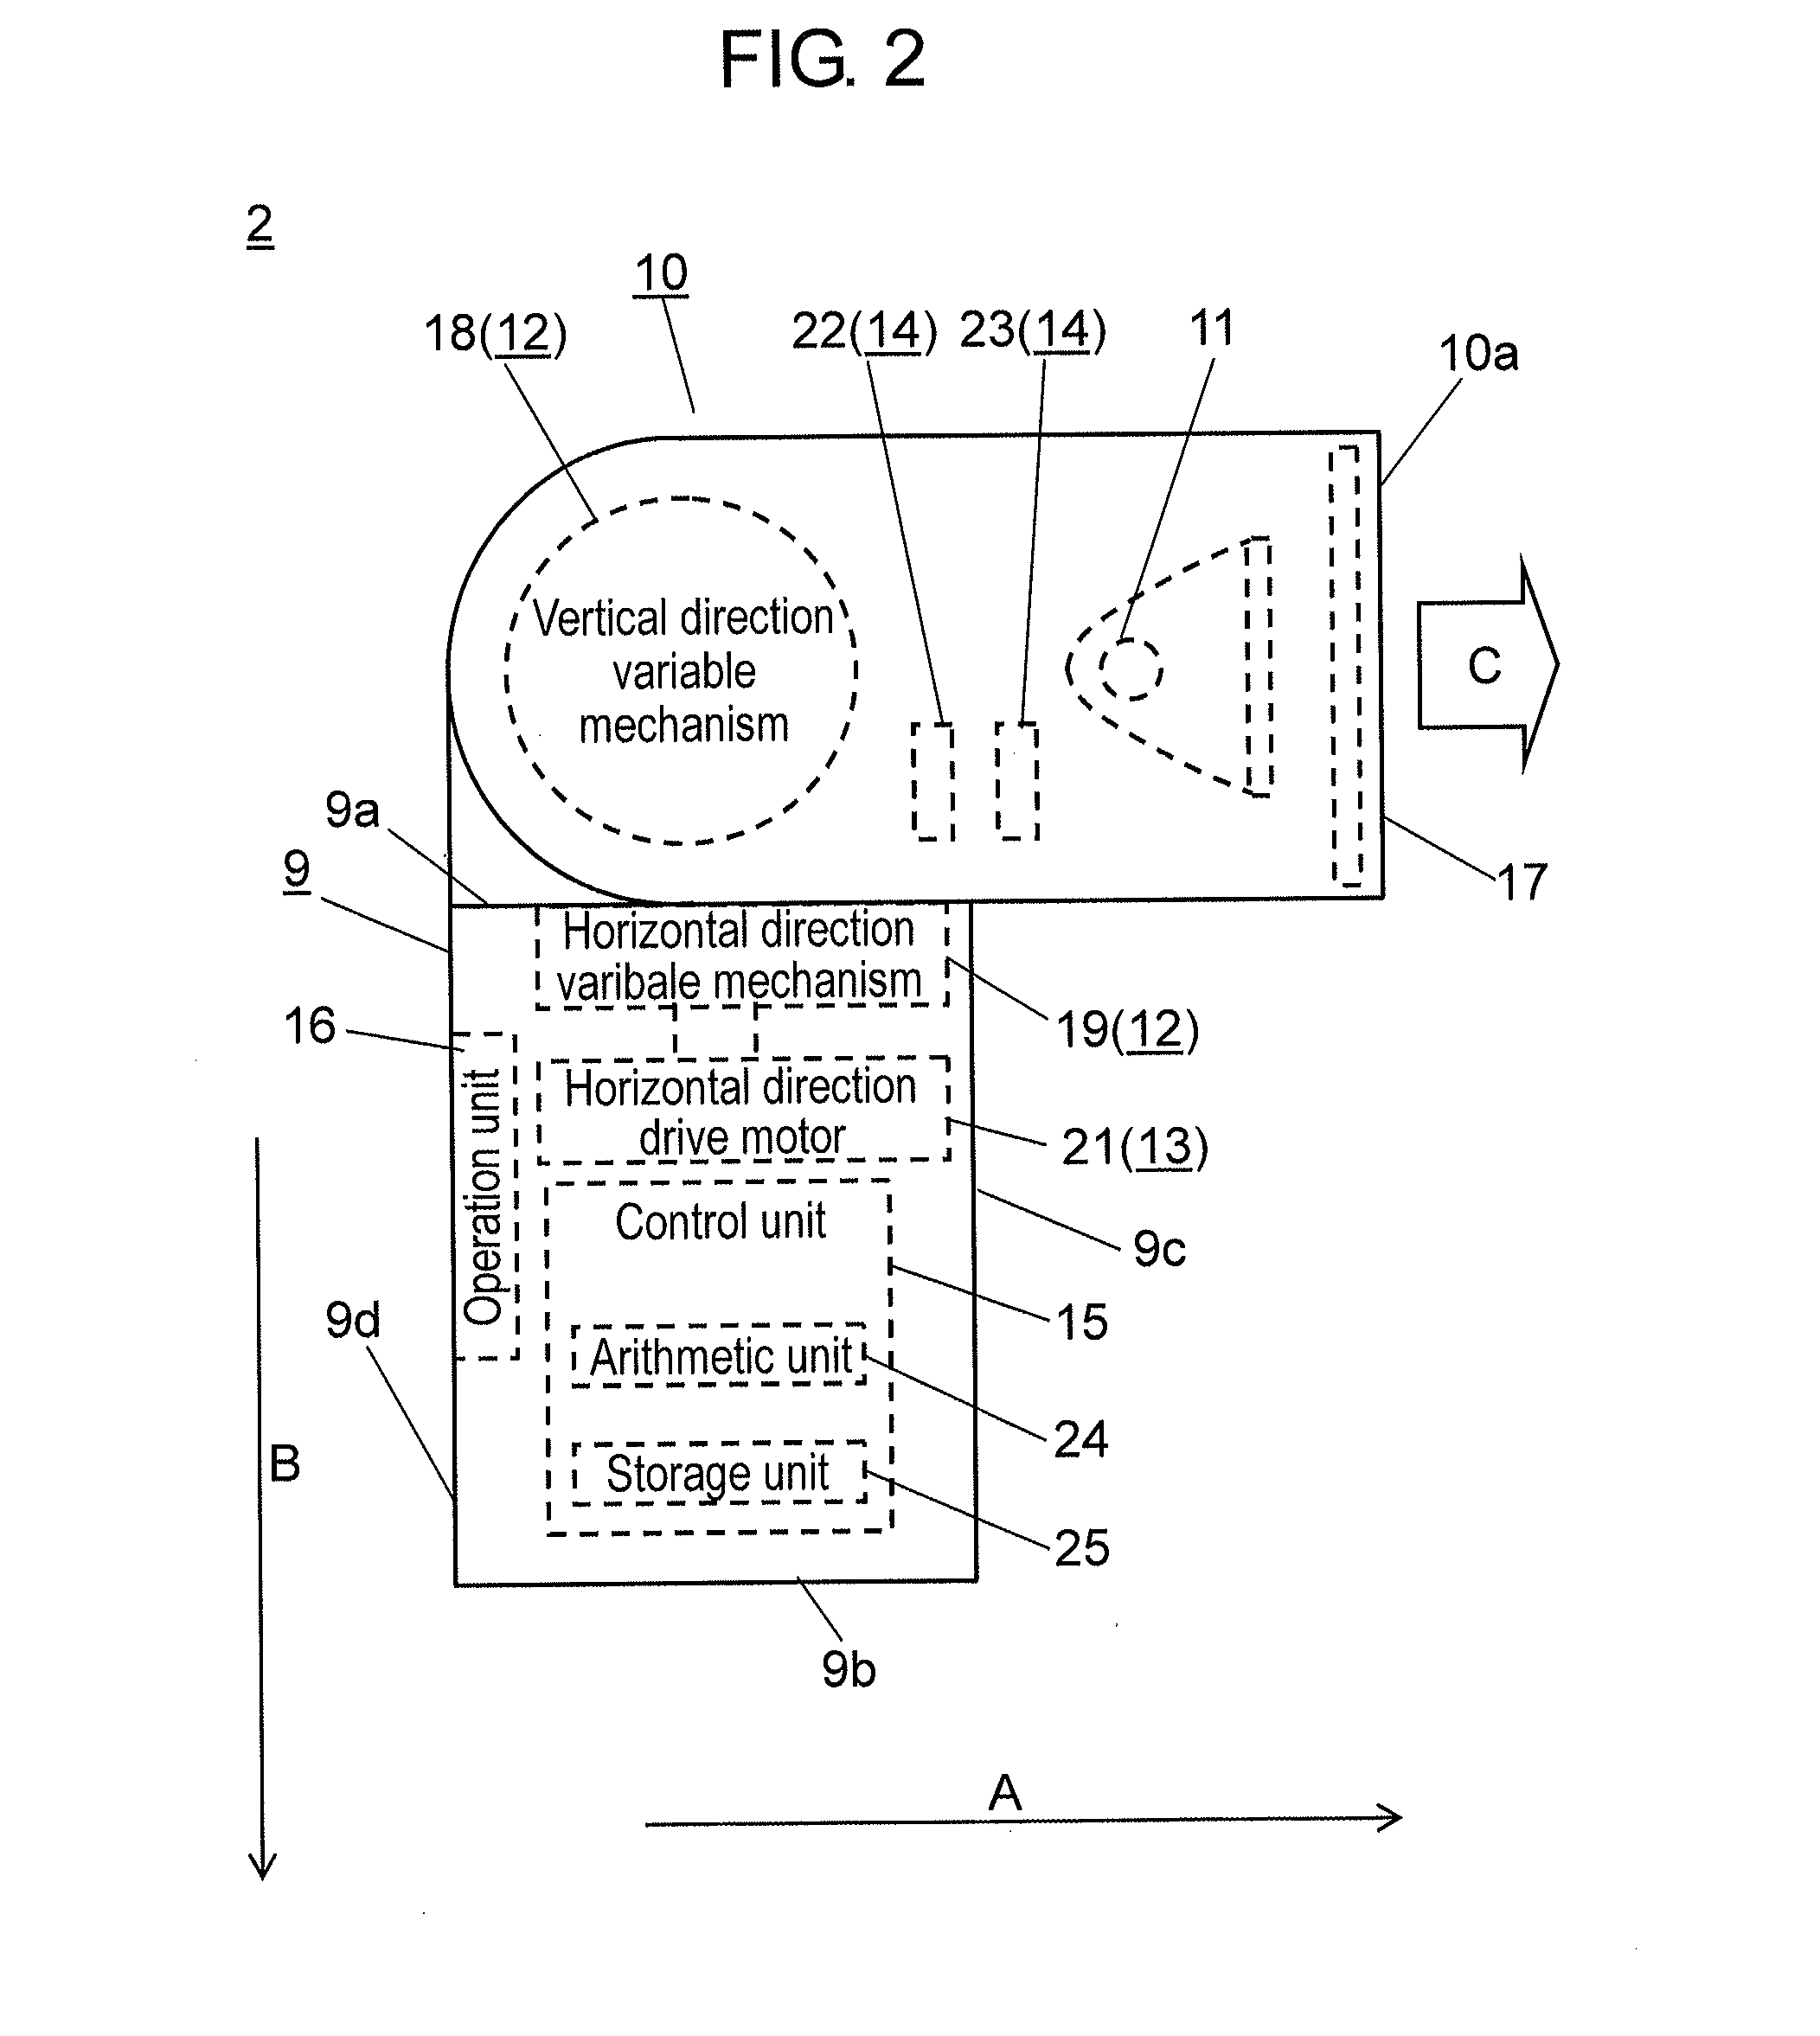 Strobe device and image-capturing device provided with strobe device